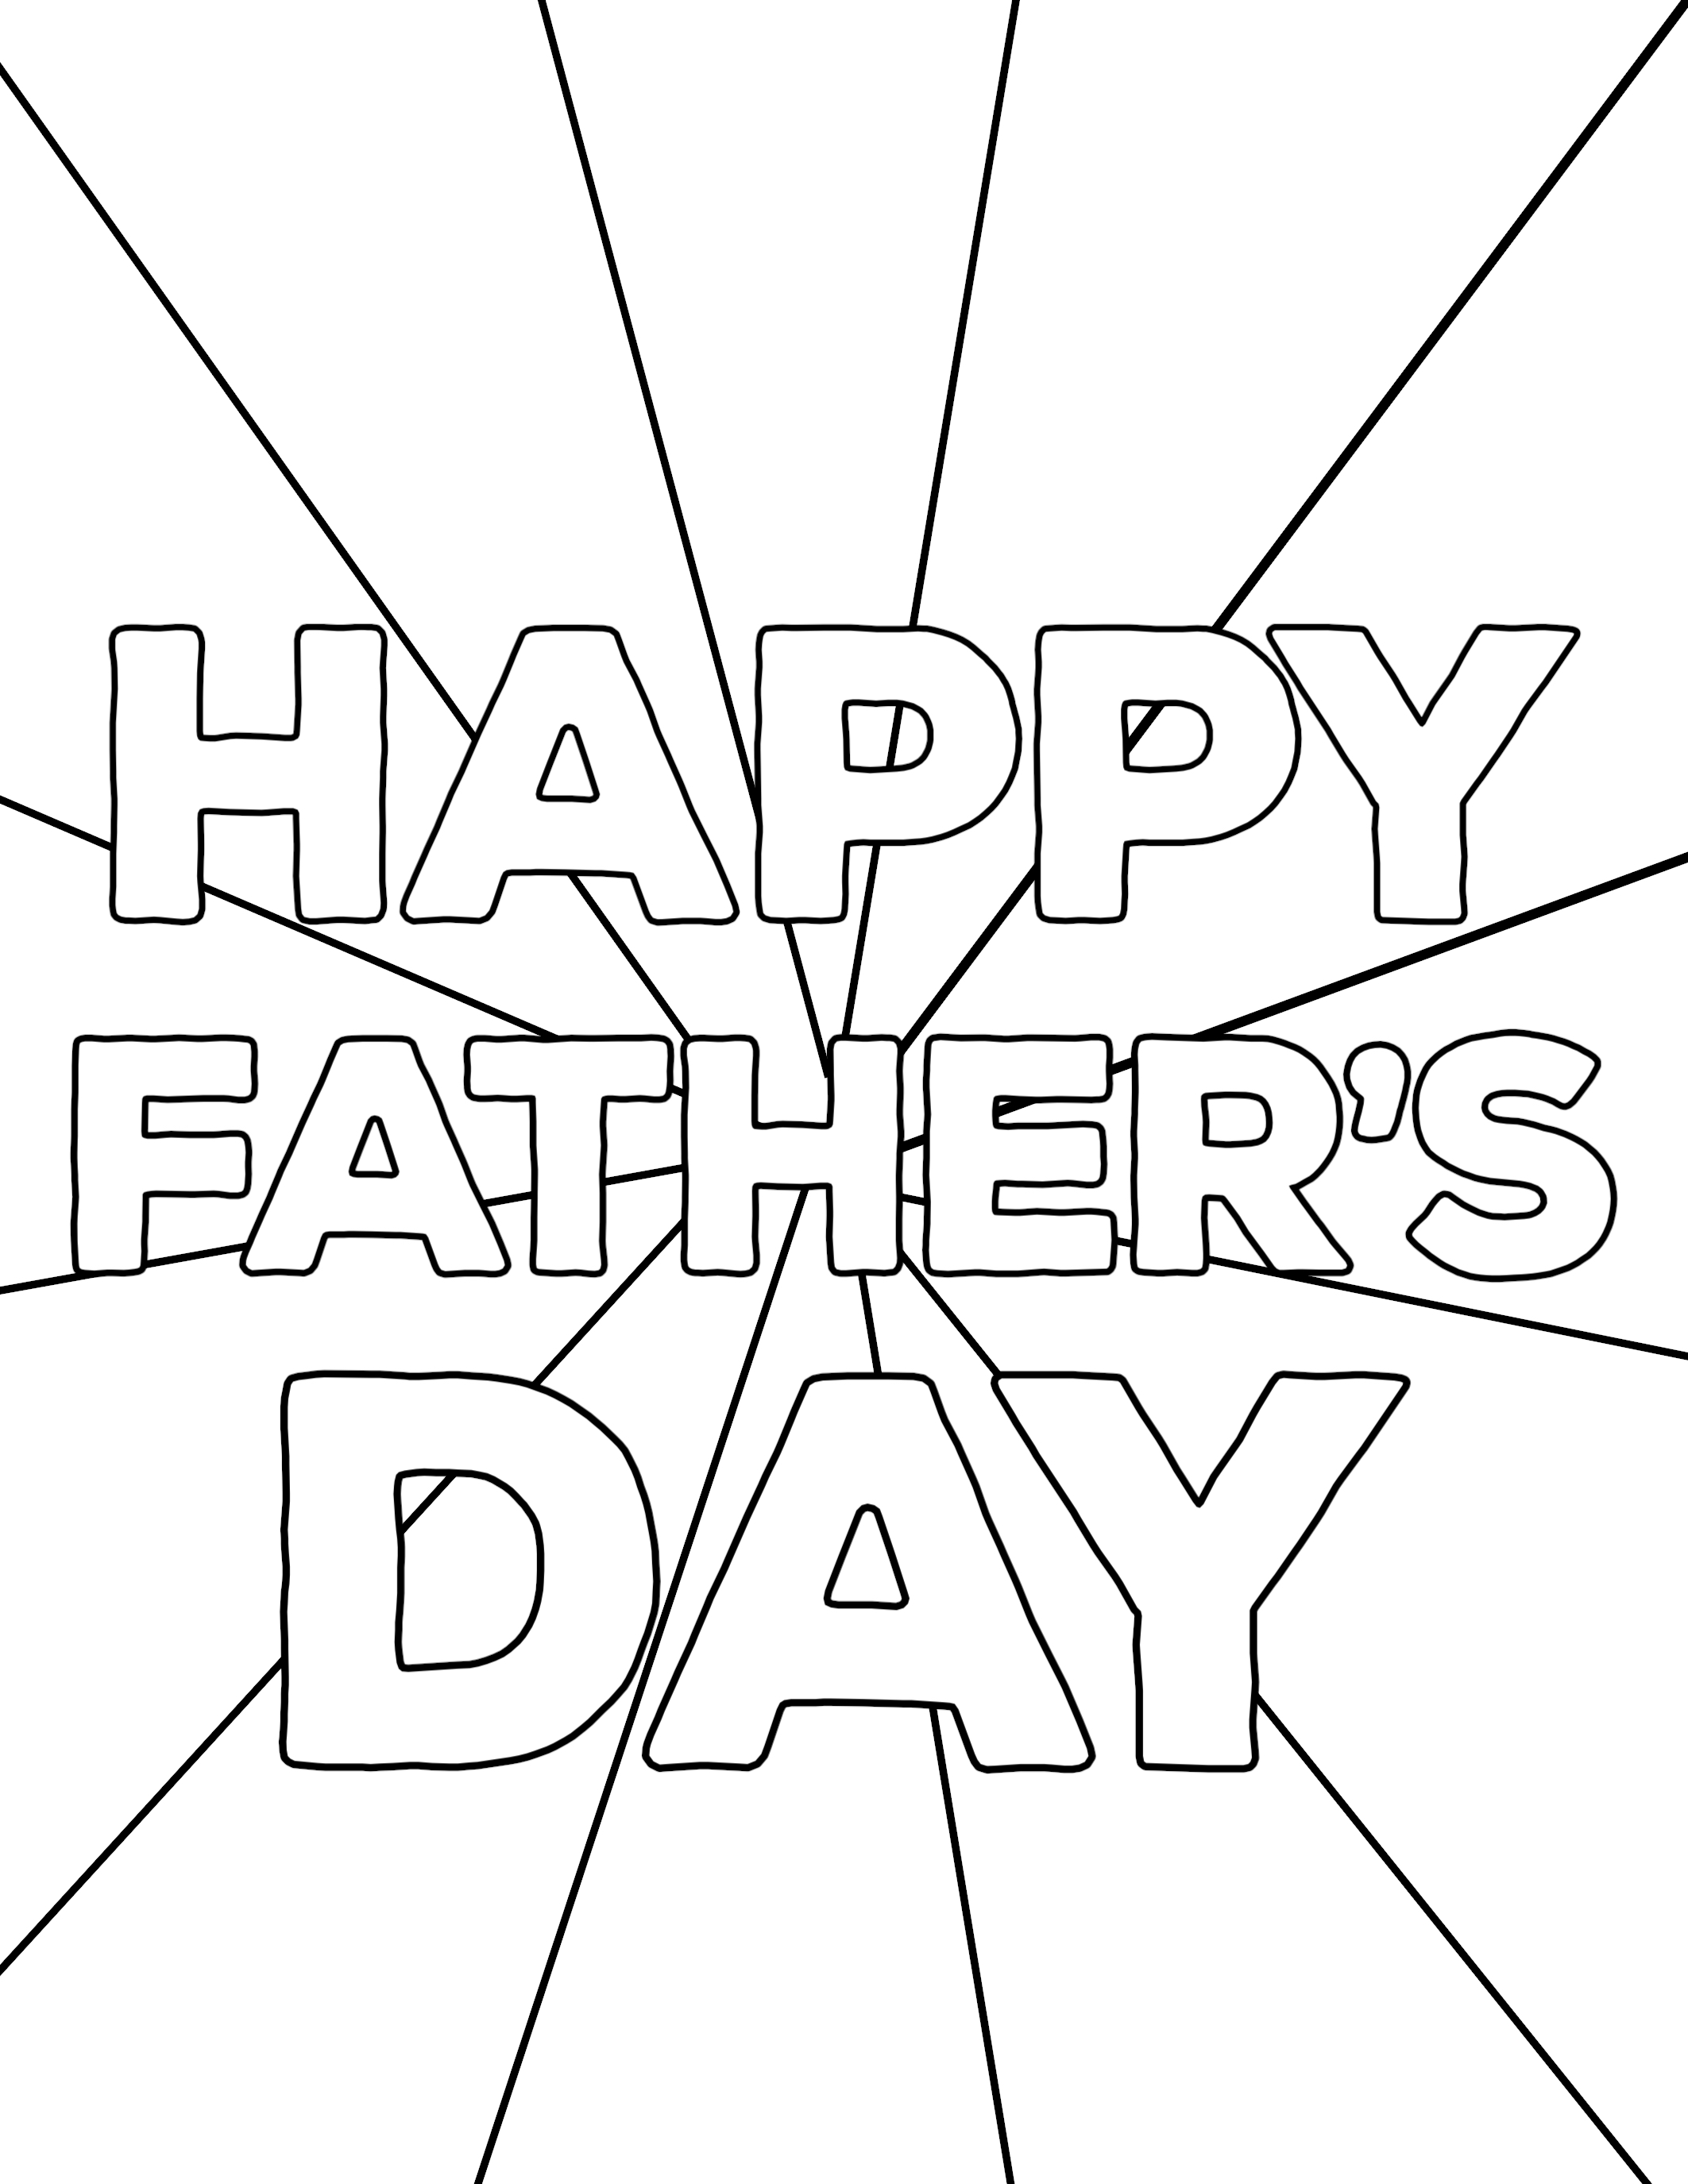 Happy Fathers Day Grandpa Coloring Pages At Getcolorings Get This 